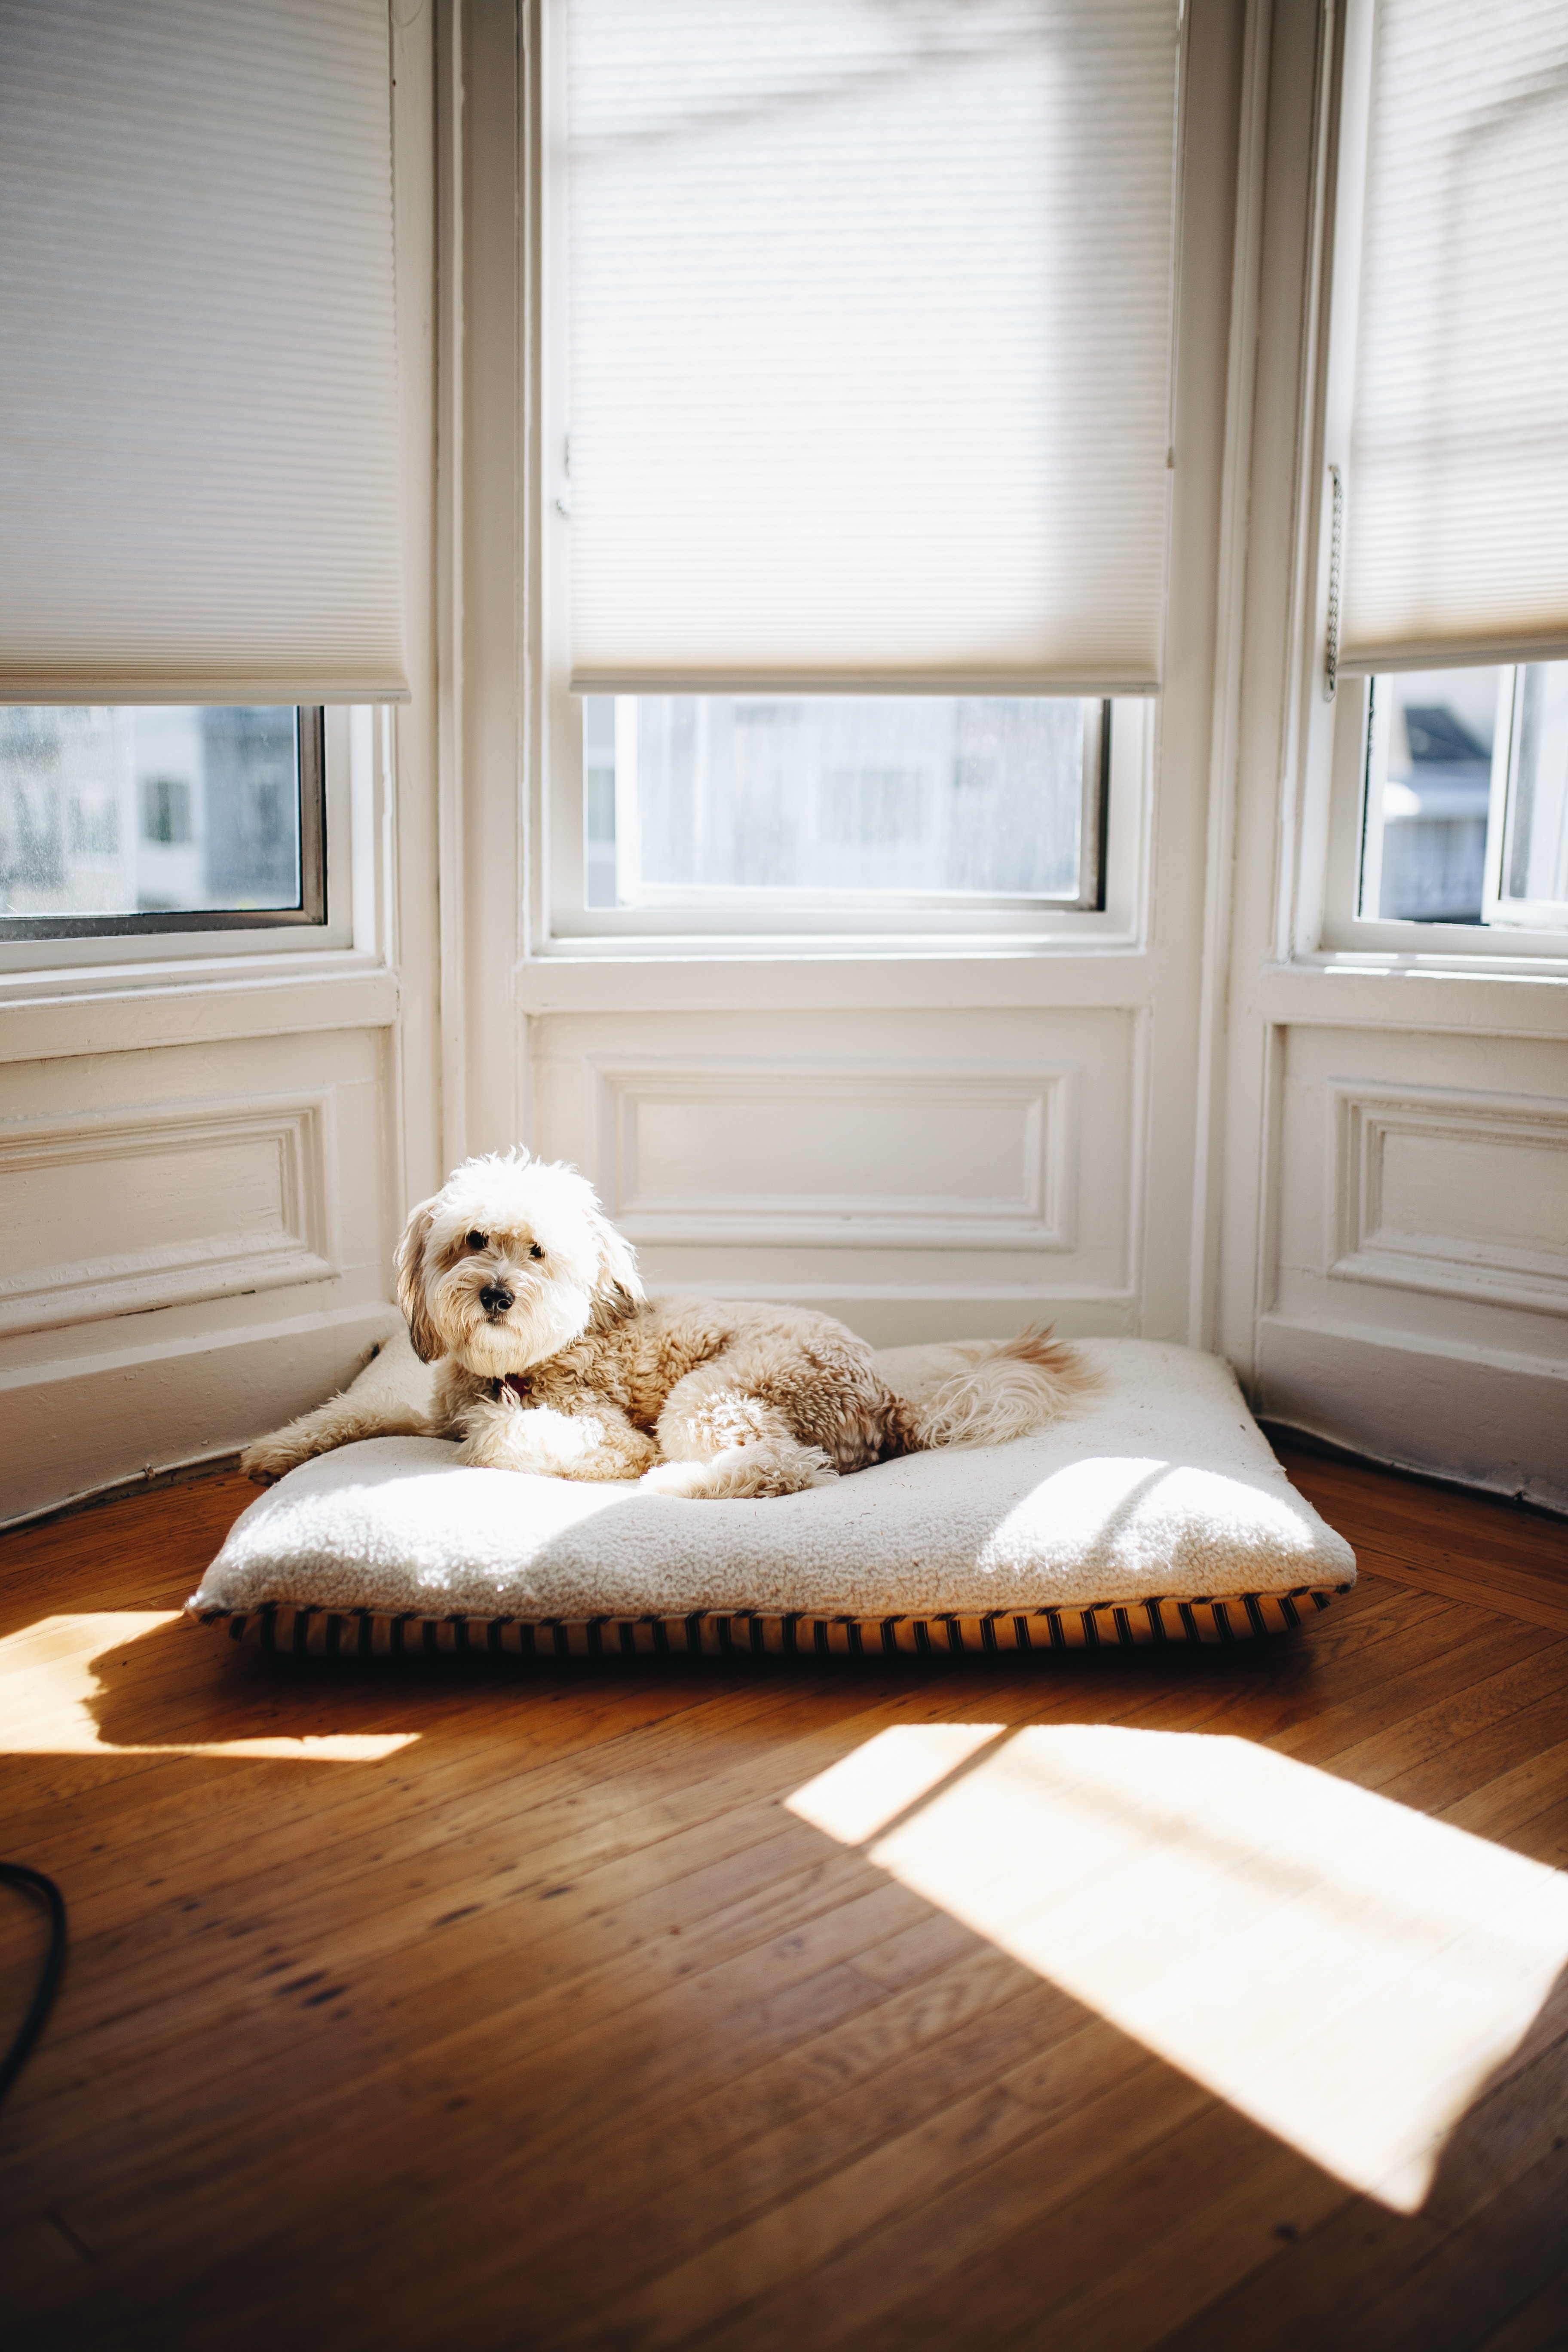 White dog sitting on a pet bed inside a home near windows.